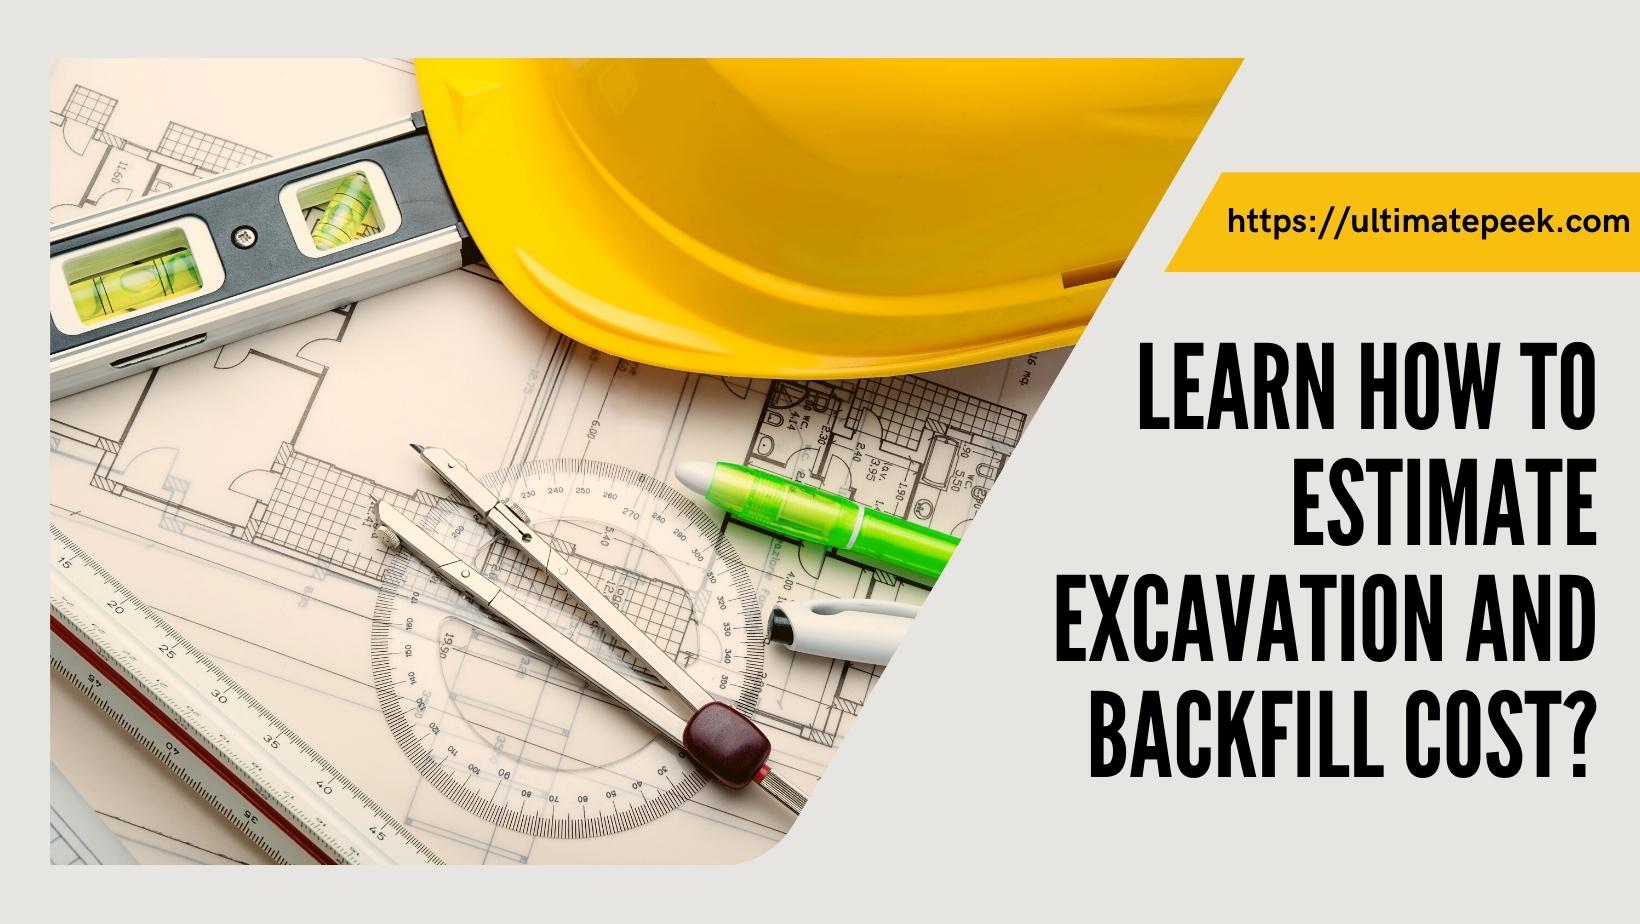 Learn How to Estimate Excavation and Backfill Cost